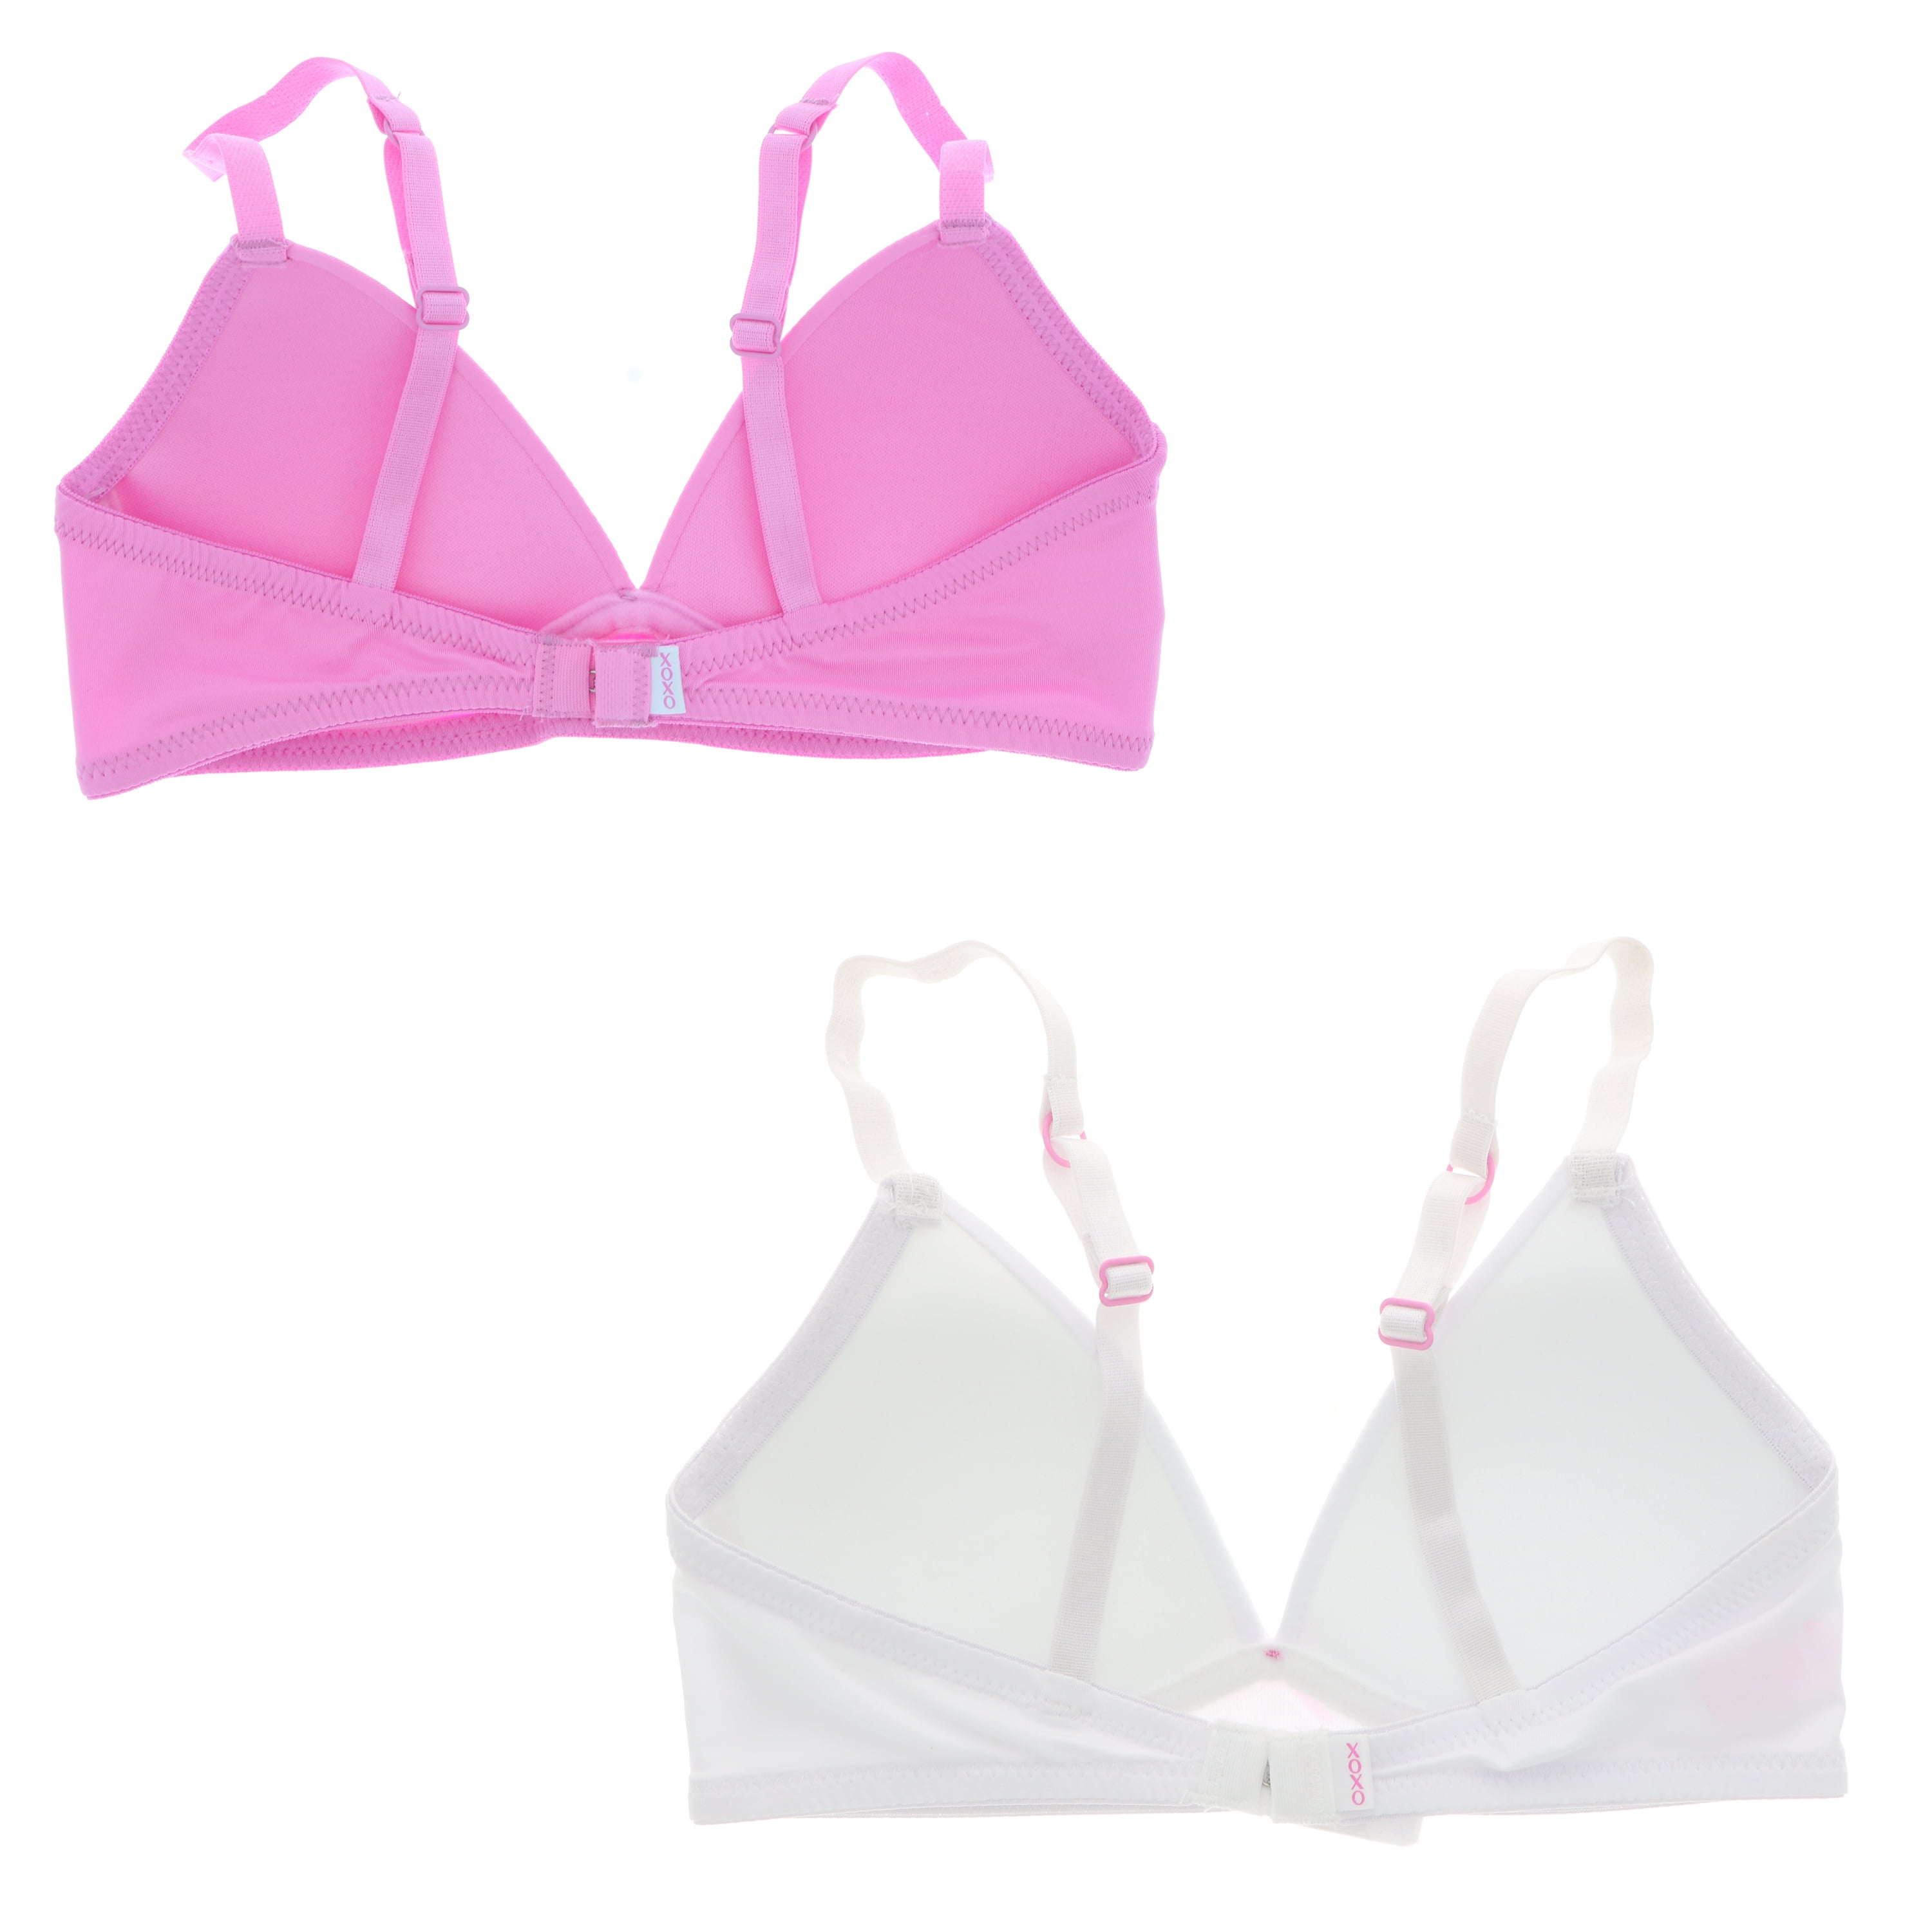 XOXO Girl's Lightly Cupped Training Bra 2 Pack - Bubblegum Pink & White -  34A 